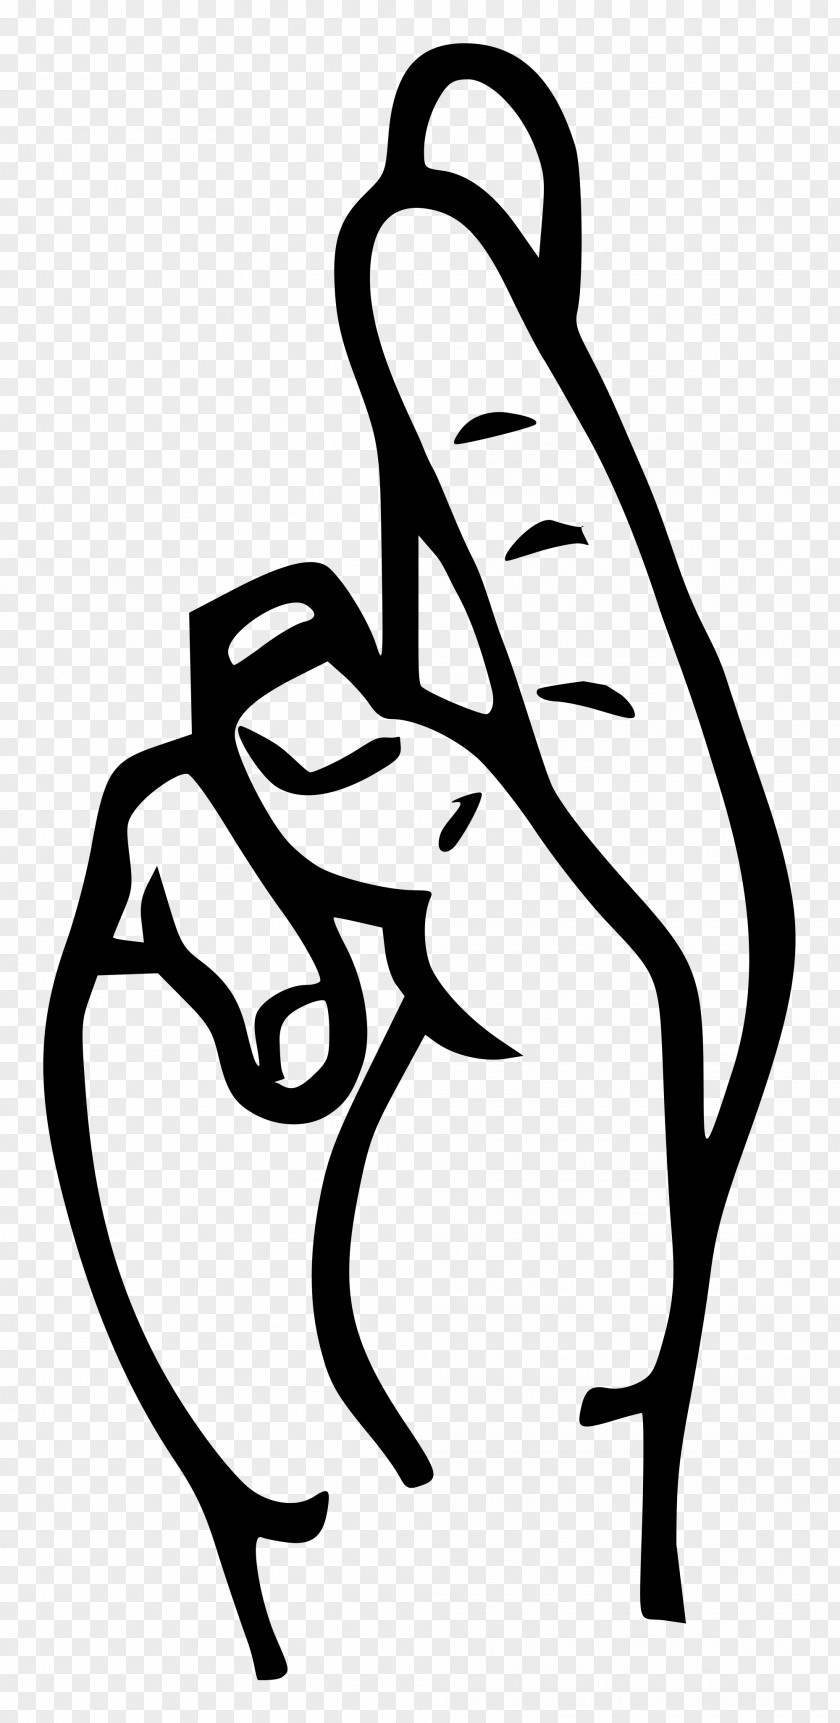 Letter F American Sign Language Fingerspelling PNG